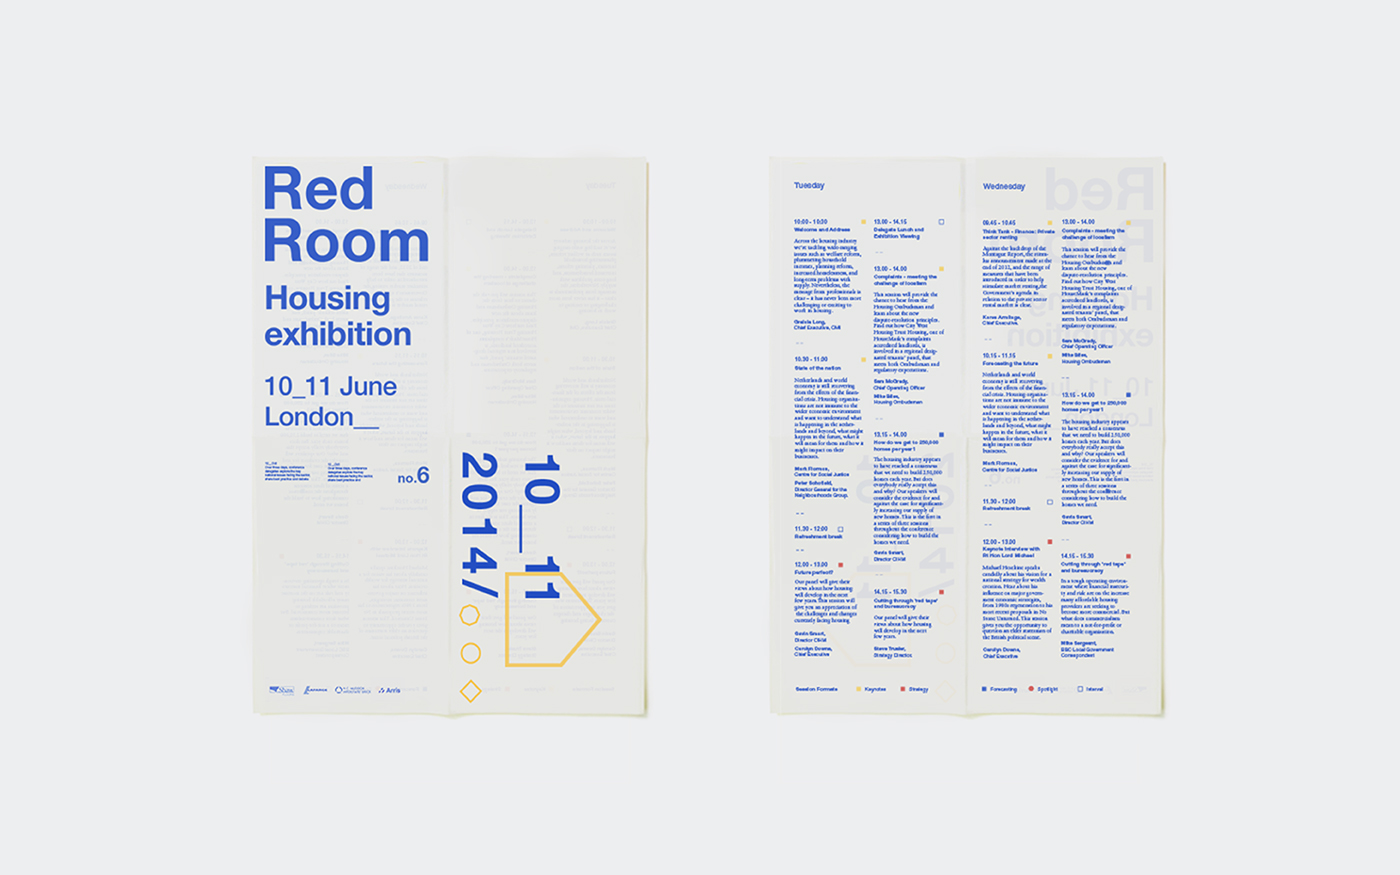 Exhibition  housing colors identity London Event poster branding 